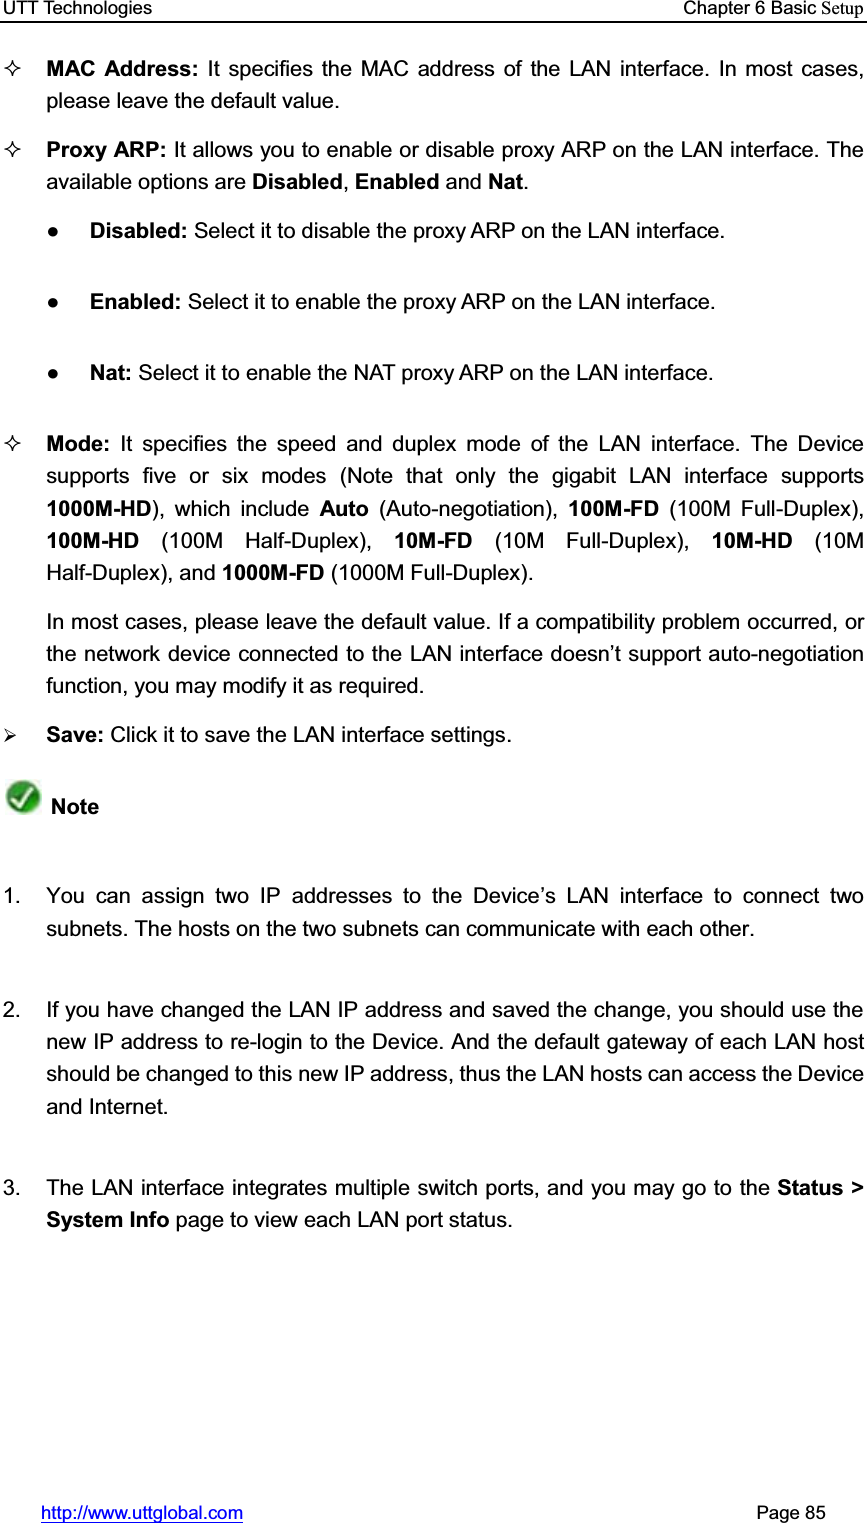 UTT Technologies    Chapter 6 Basic Setuphttp://www.uttglobal.com                                                       Page 85 MAC Address: It specifies the MAC address of the LAN interface. In most cases, please leave the default value. Proxy ARP: It allows you to enable or disable proxy ARP on the LAN interface. The available options are Disabled,Enabled and Nat.ƔDisabled: Select it to disable the proxy ARP on the LAN interface. ƔEnabled: Select it to enable the proxy ARP on the LAN interface. ƔNat: Select it to enable the NAT proxy ARP on the LAN interface.Mode:  It specifies the speed and duplex mode of the LAN interface. The Device supports five or six modes (Note that only the gigabit LAN interface supports 1000M-HD), which include Auto  (Auto-negotiation),  100M-FD (100M Full-Duplex), 100M-HD (100M Half-Duplex), 10M-FD (10M Full-Duplex), 10M-HD (10M Half-Duplex), and 1000M-FD (1000M Full-Duplex).   In most cases, please leave the default value. If a compatibility problem occurred, or the network device connected to the LAN interface doesn¶t support auto-negotiation function, you may modify it as required.¾Save: Click it to save the LAN interface settings.Note1.  You can assign two IP addresses to the Device¶s LAN interface to connect two subnets. The hosts on the two subnets can communicate with each other. 2.  If you have changed the LAN IP address and saved the change, you should use the new IP address to re-login to the Device. And the default gateway of each LAN host should be changed to this new IP address, thus the LAN hosts can access the Device and Internet. 3.  The LAN interface integrates multiple switch ports, and you may go to the Status &gt; System Info page to view each LAN port status.   